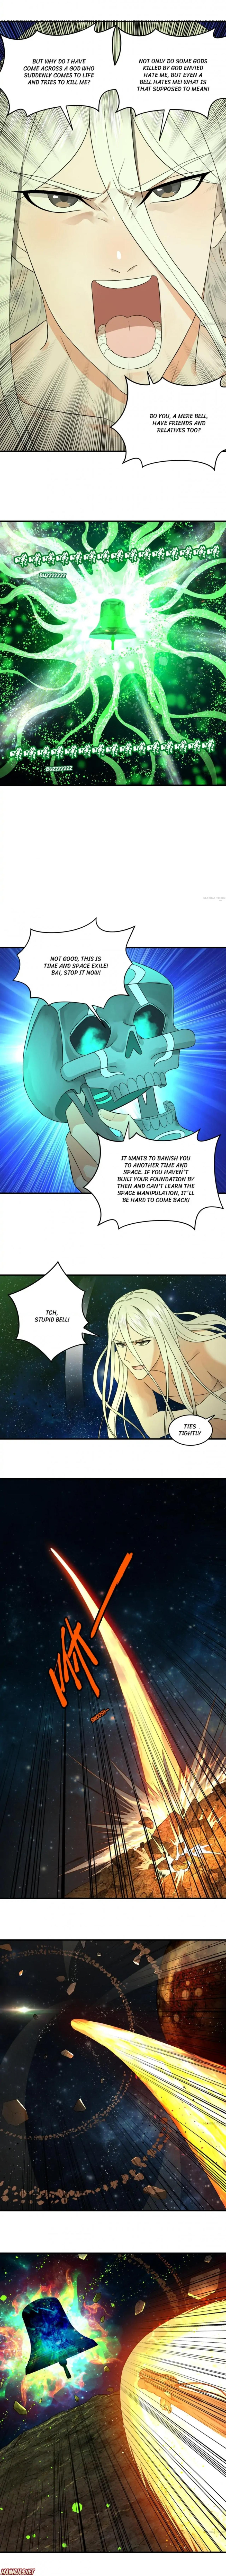 My Three Thousand Years To The Sky - Page 2